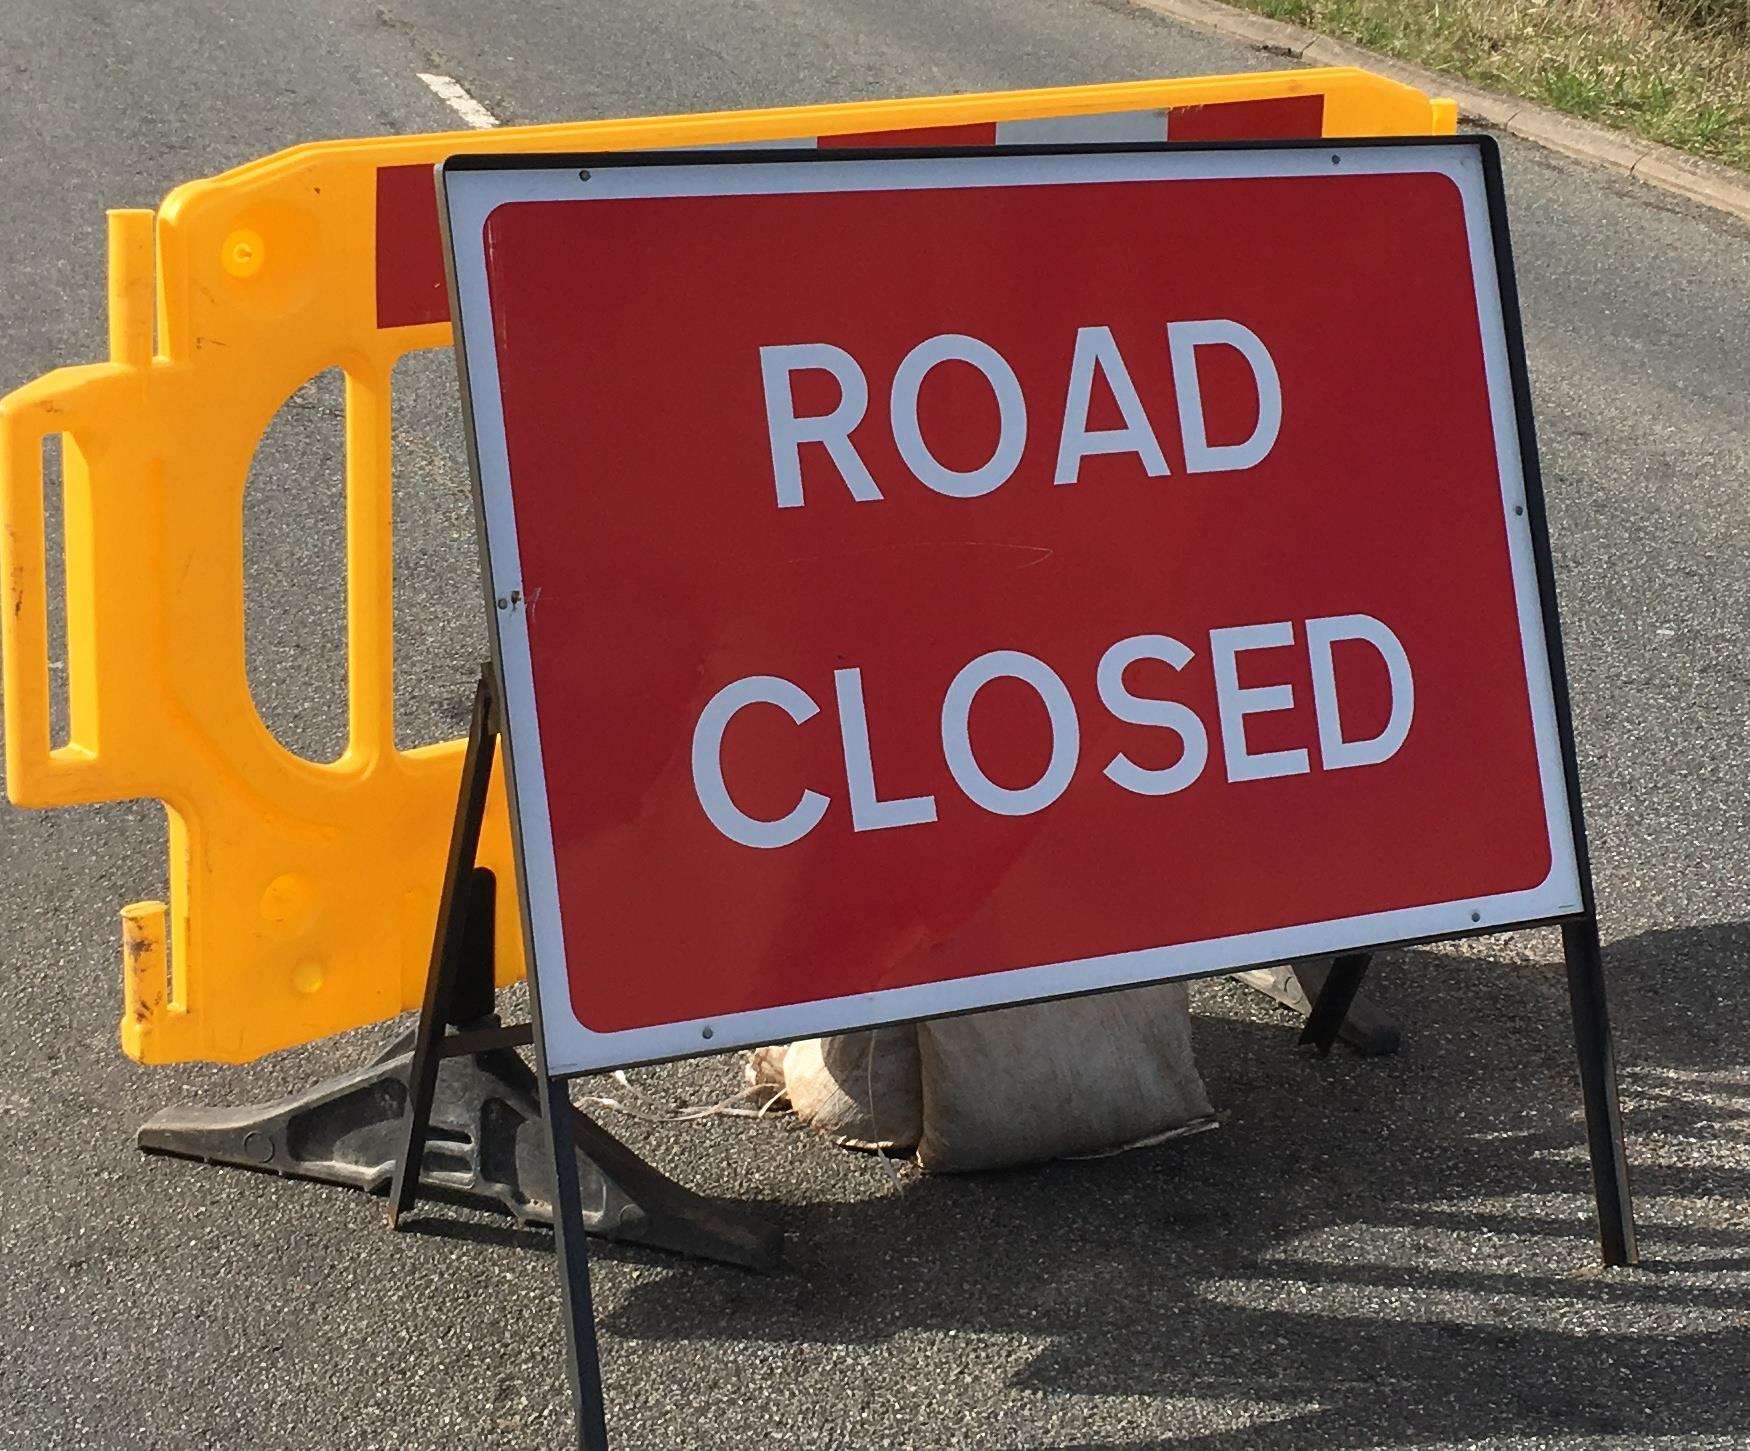 The roads will be closing for resurfacing works. Stock image